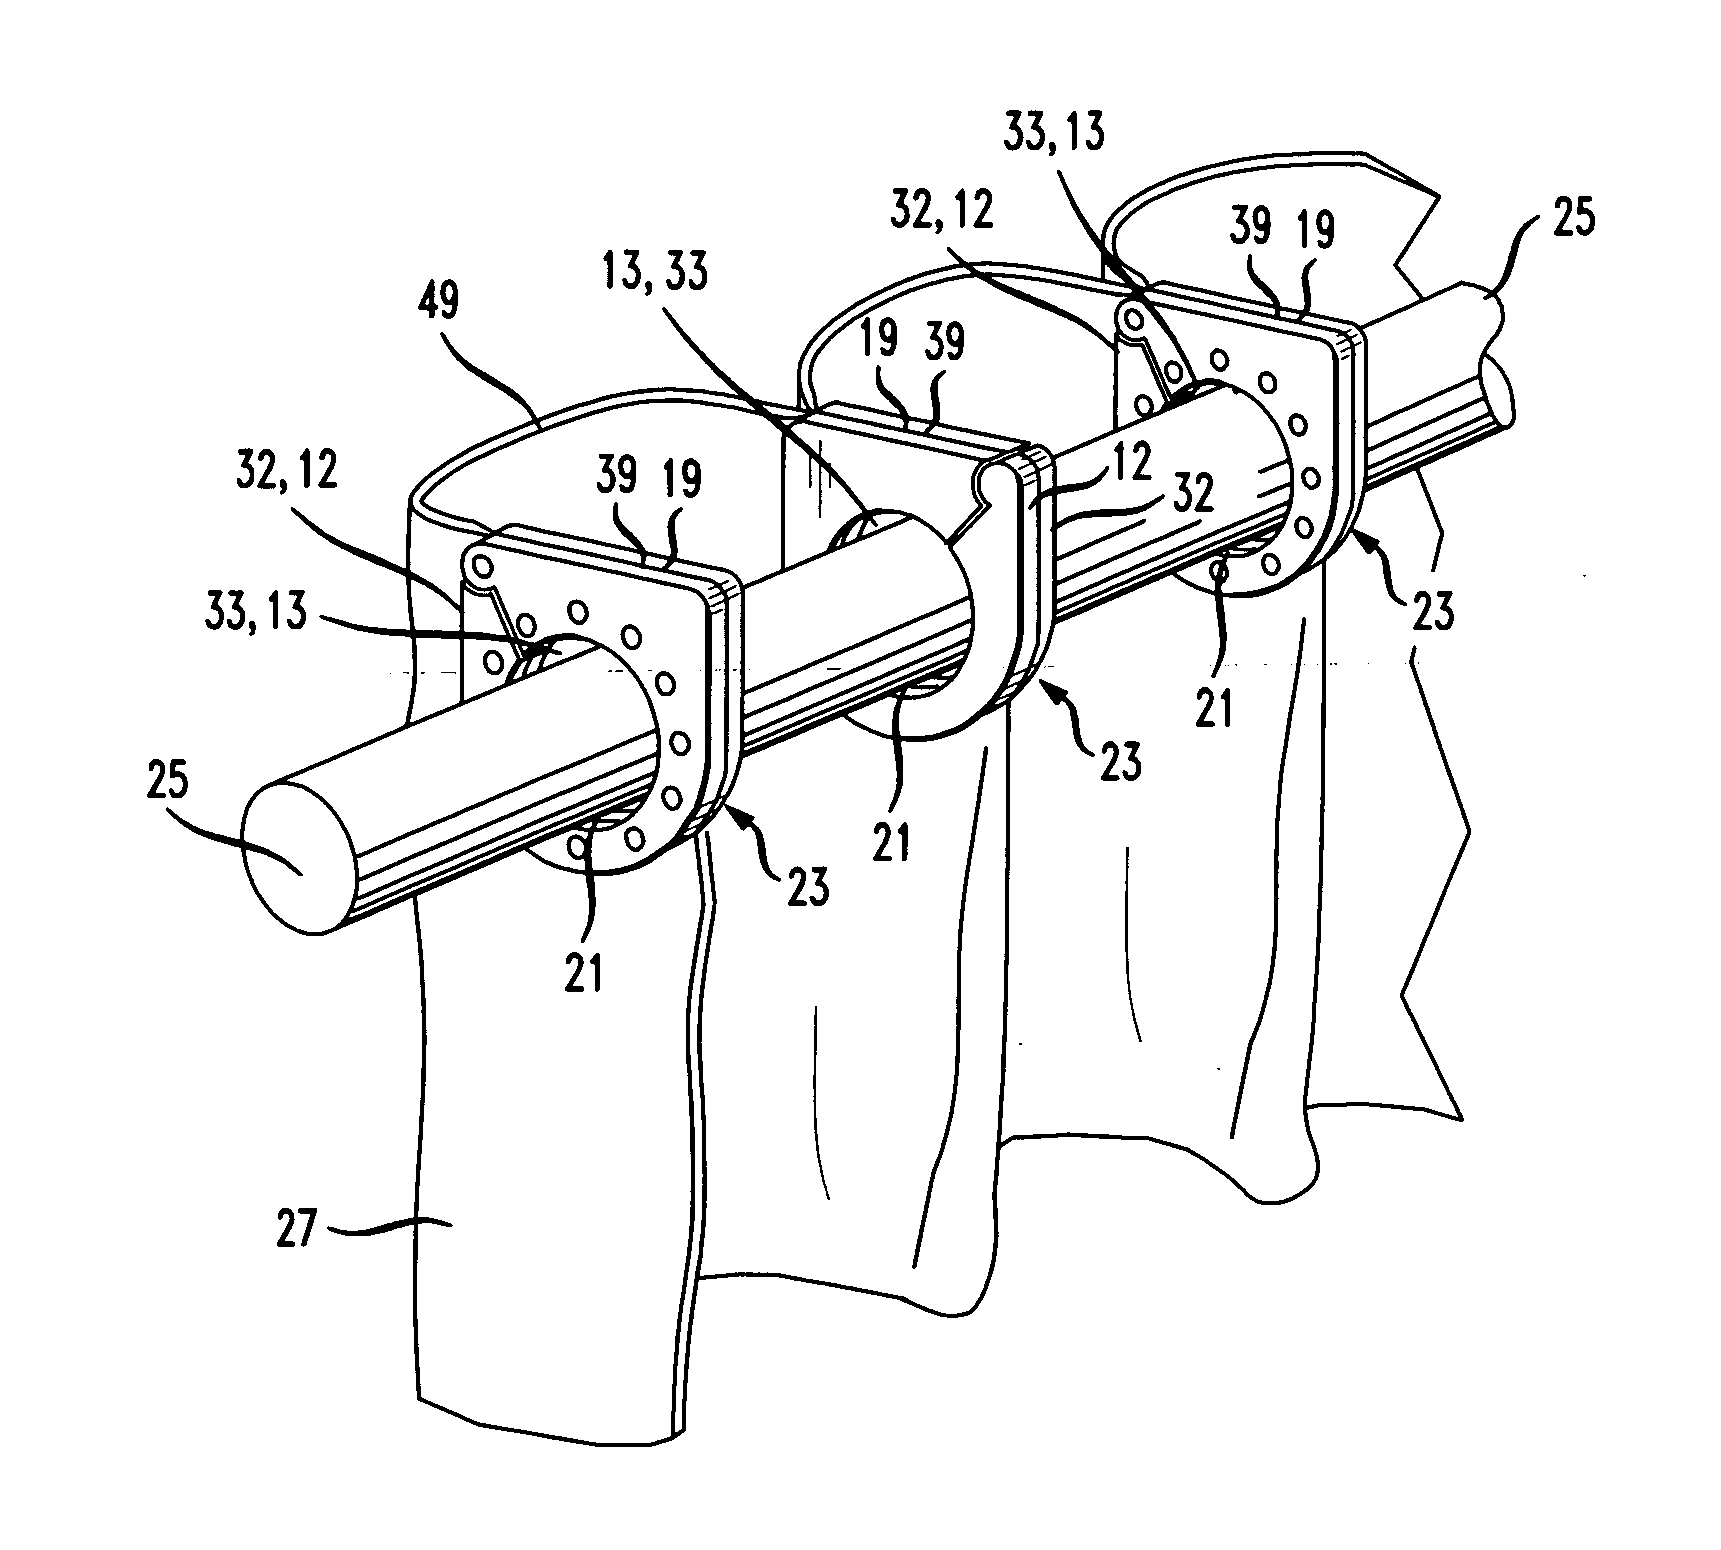 Hookfree curtain and fixture thereof